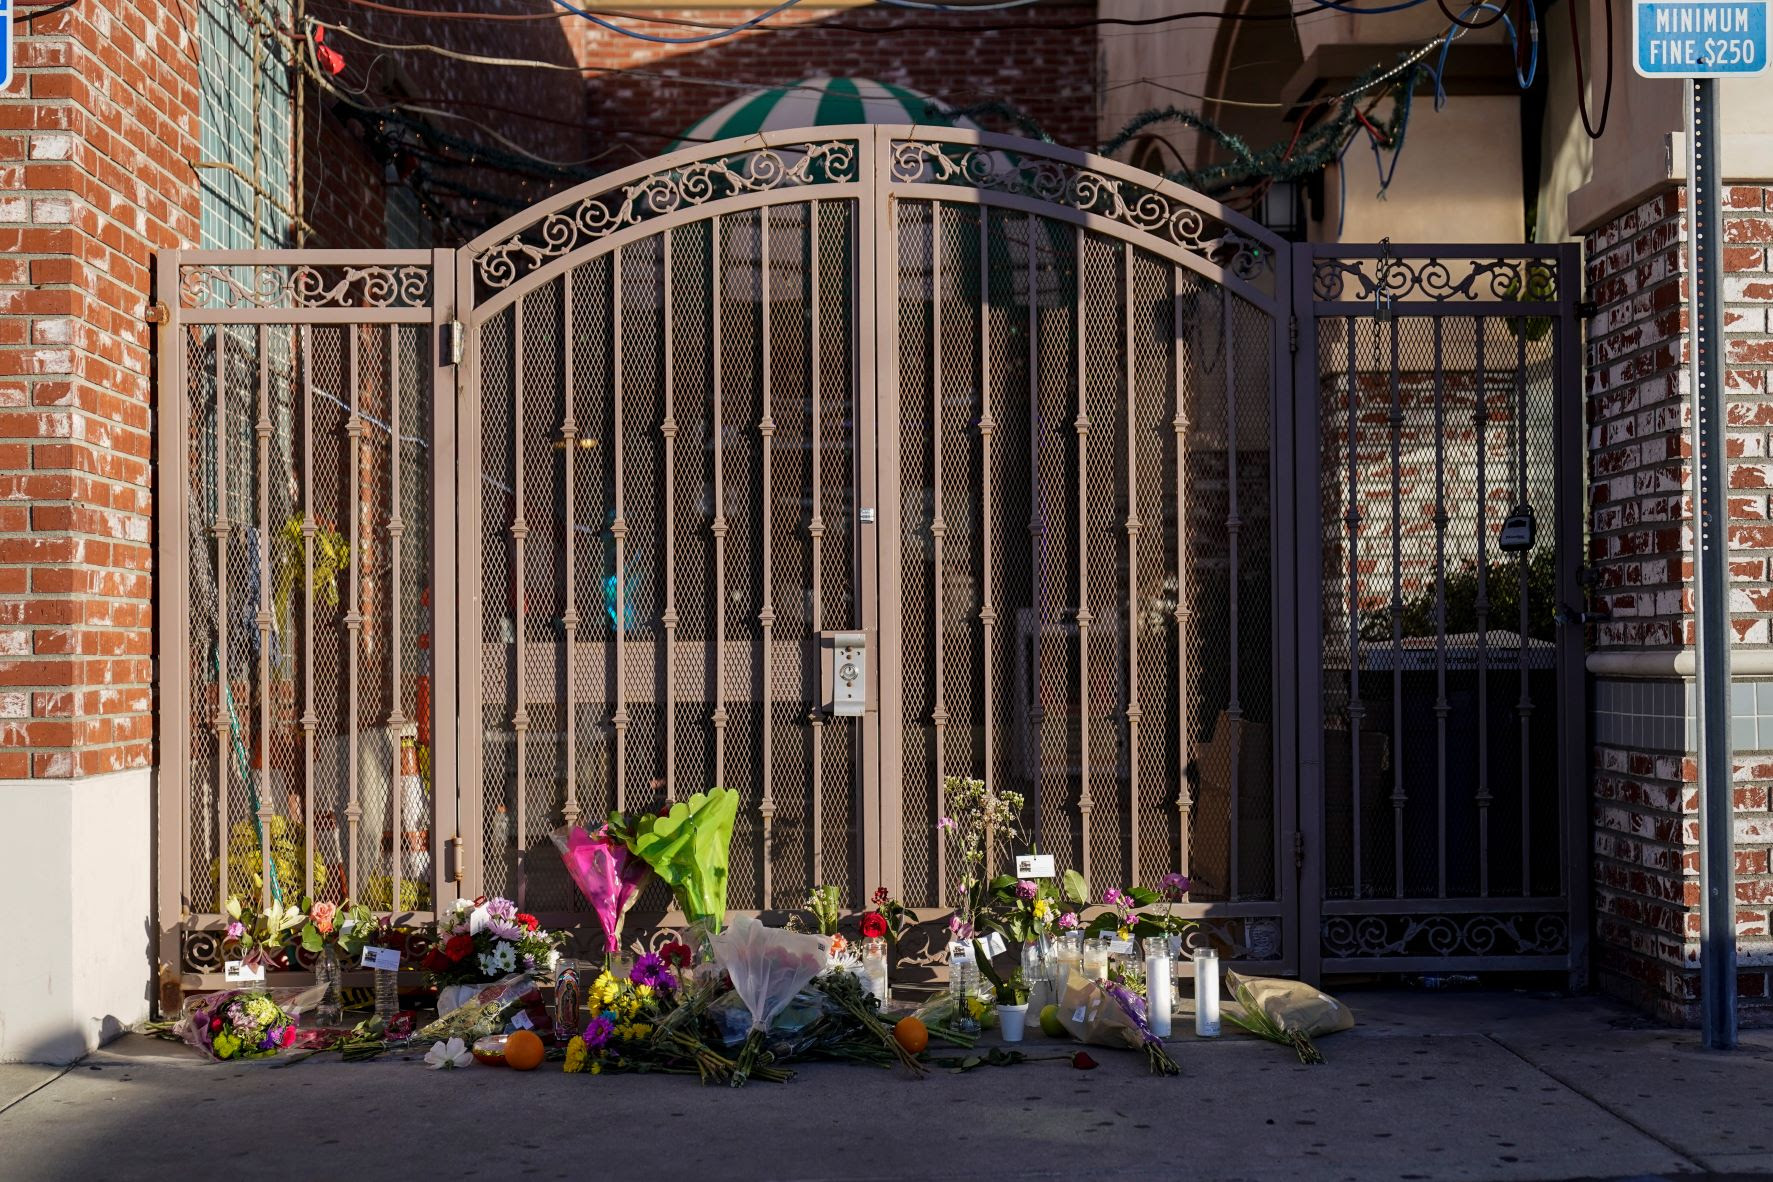 Flowers are placed at the entrance to Star Dance Studio in Monterey Park, Calif., Monday, Jan. 23, 2023.